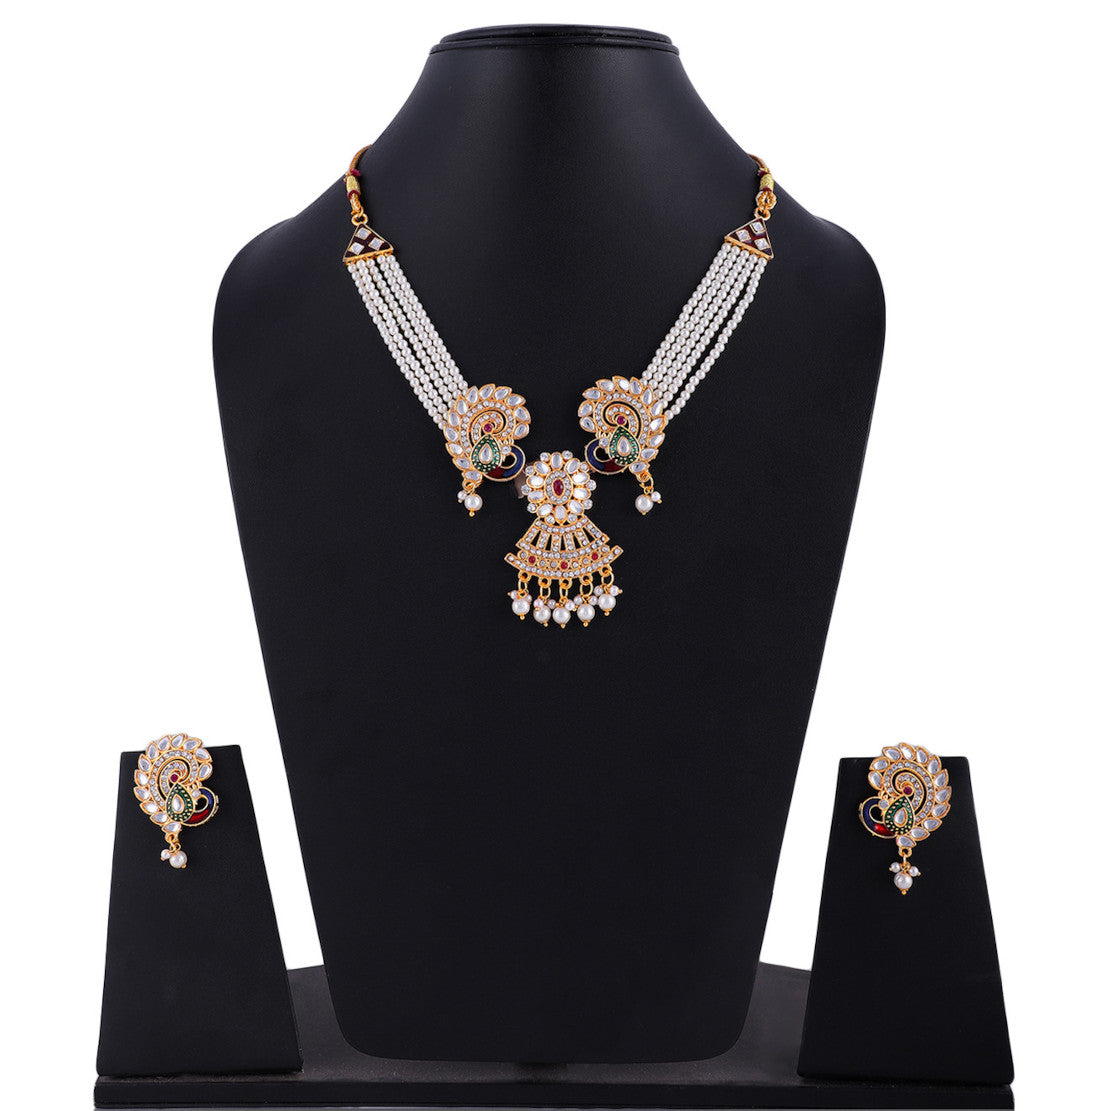 Best Traditional Designed by Handcrafted Rani Haar Necklace with Earrings for Women | Buy This Necklace Online from Mekkna